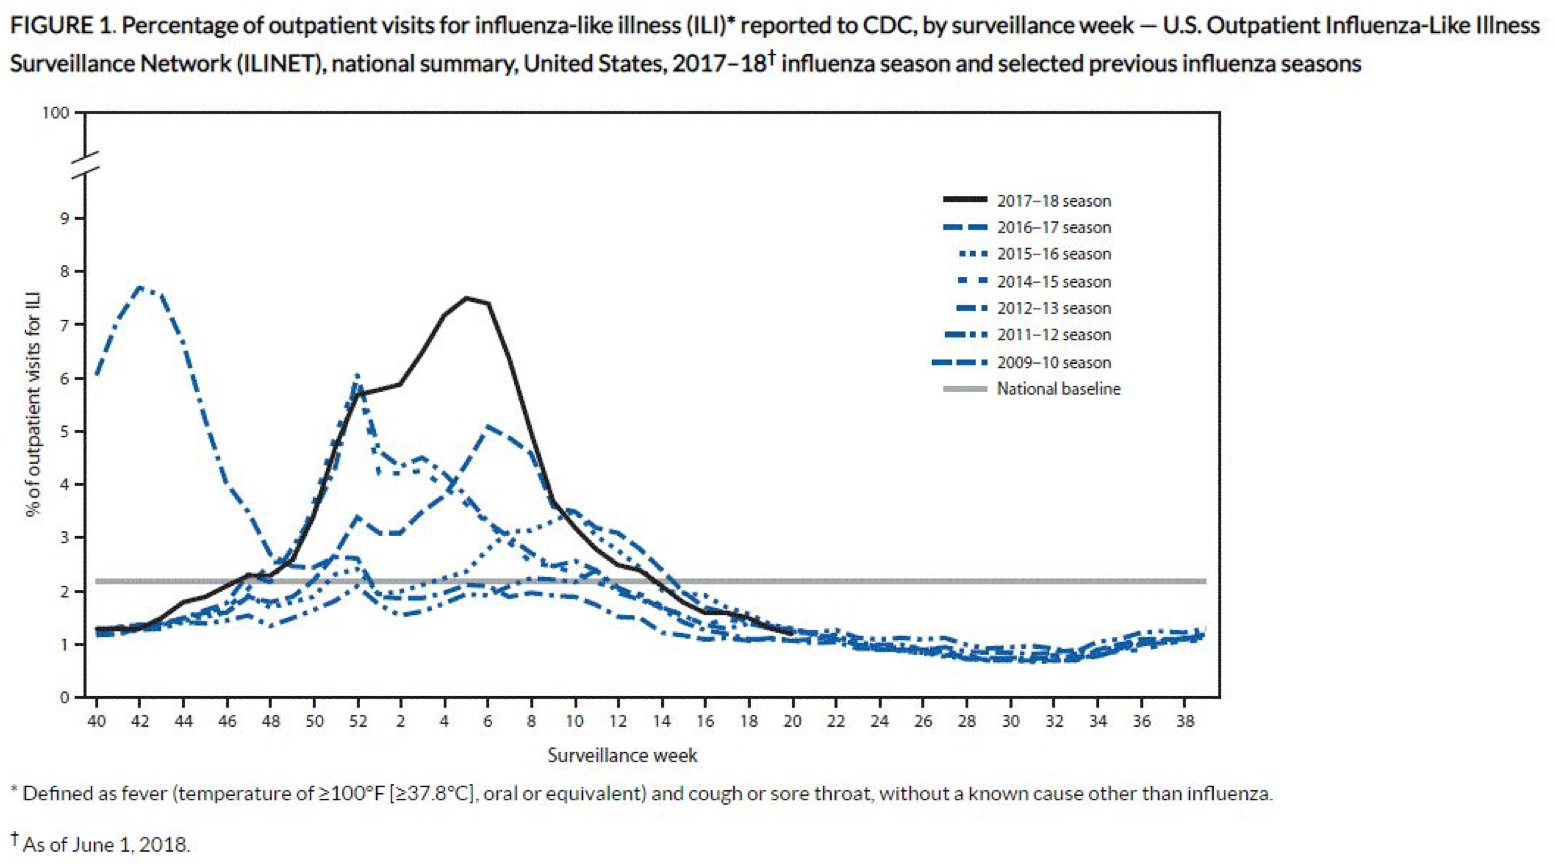 Percentage of outpatient visits for influenza-like illness